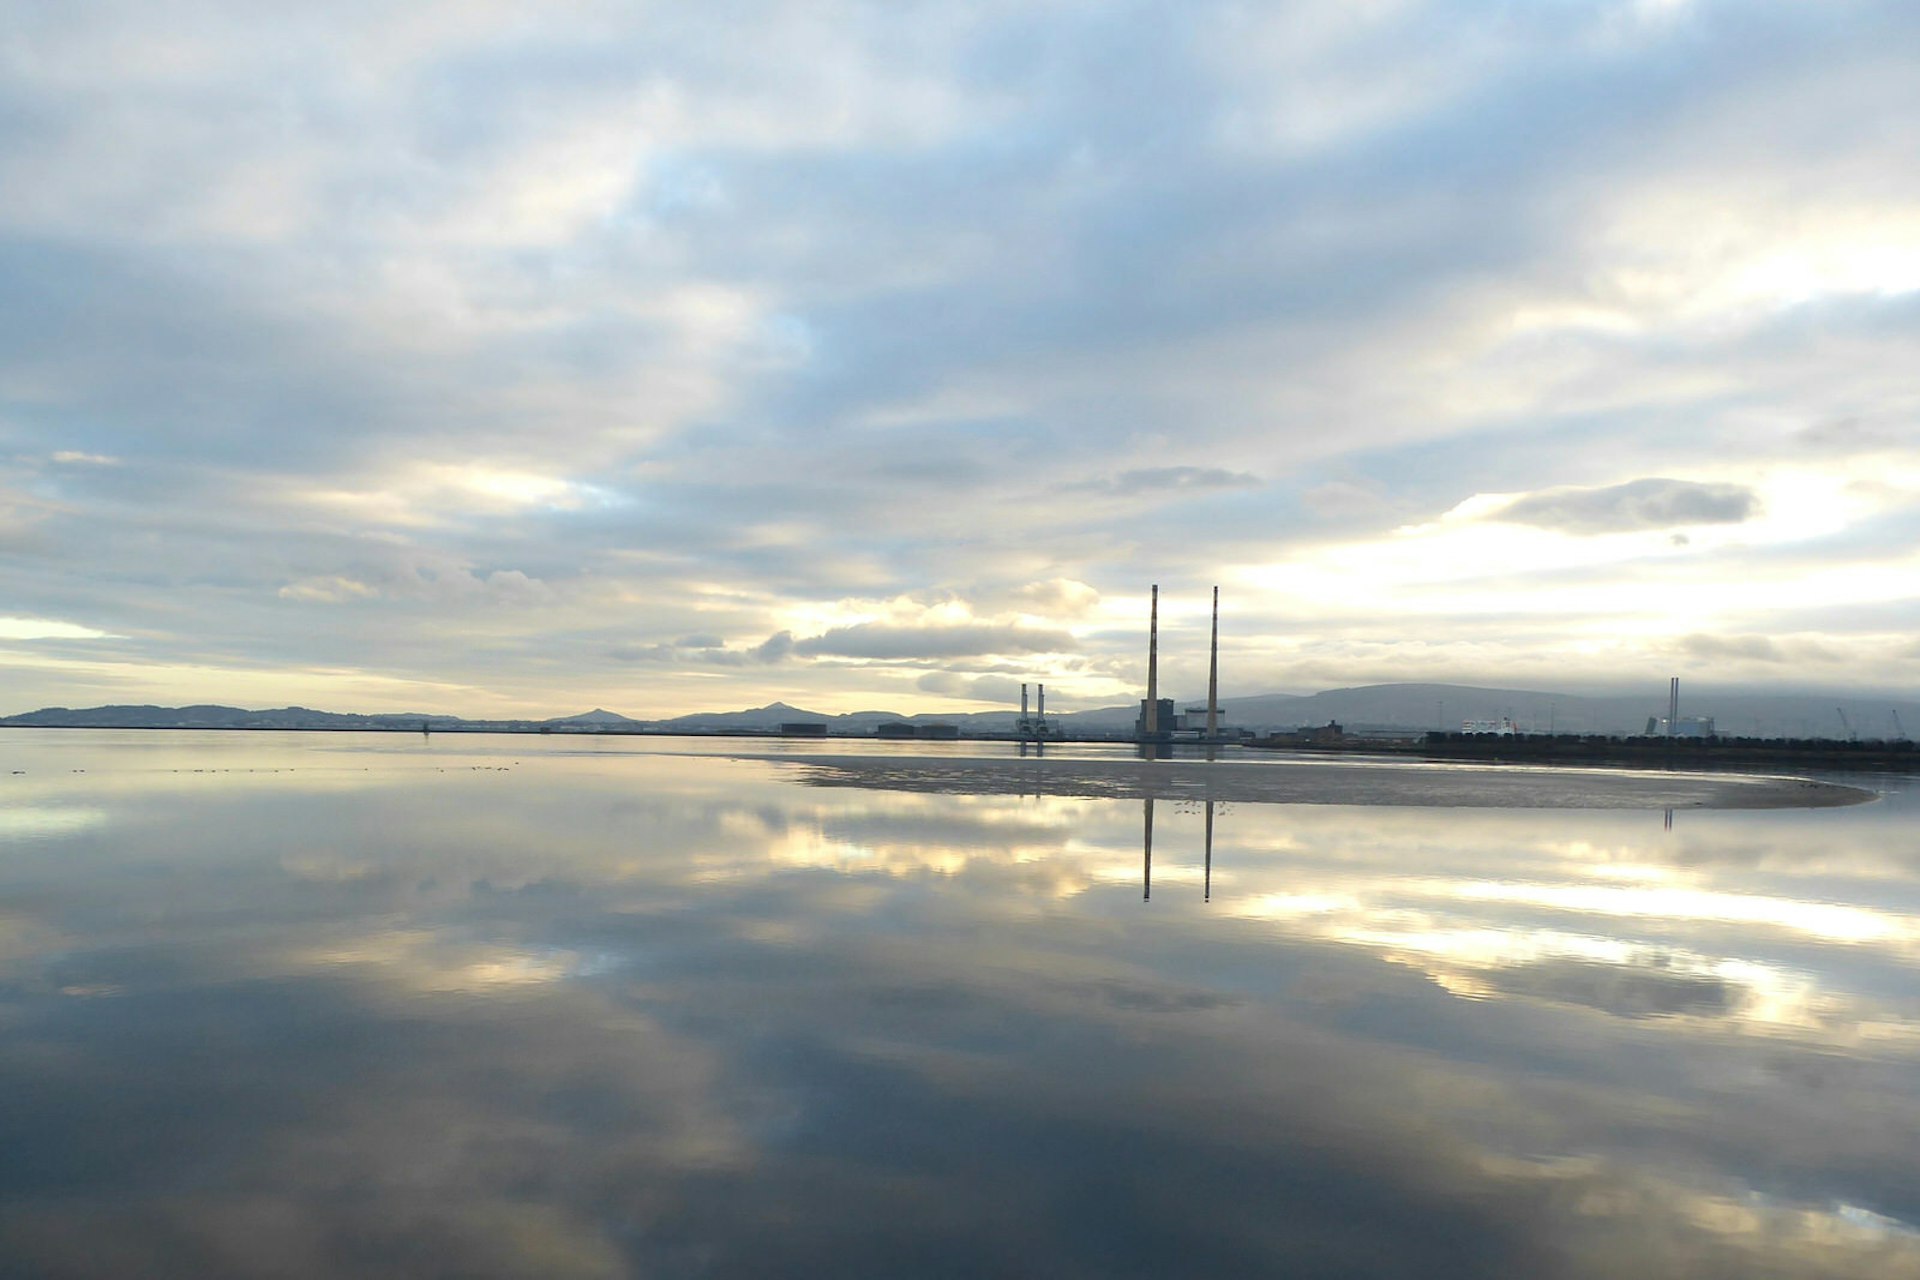 The beach at Dollymount Strand with some sunlight peeping through the clouds